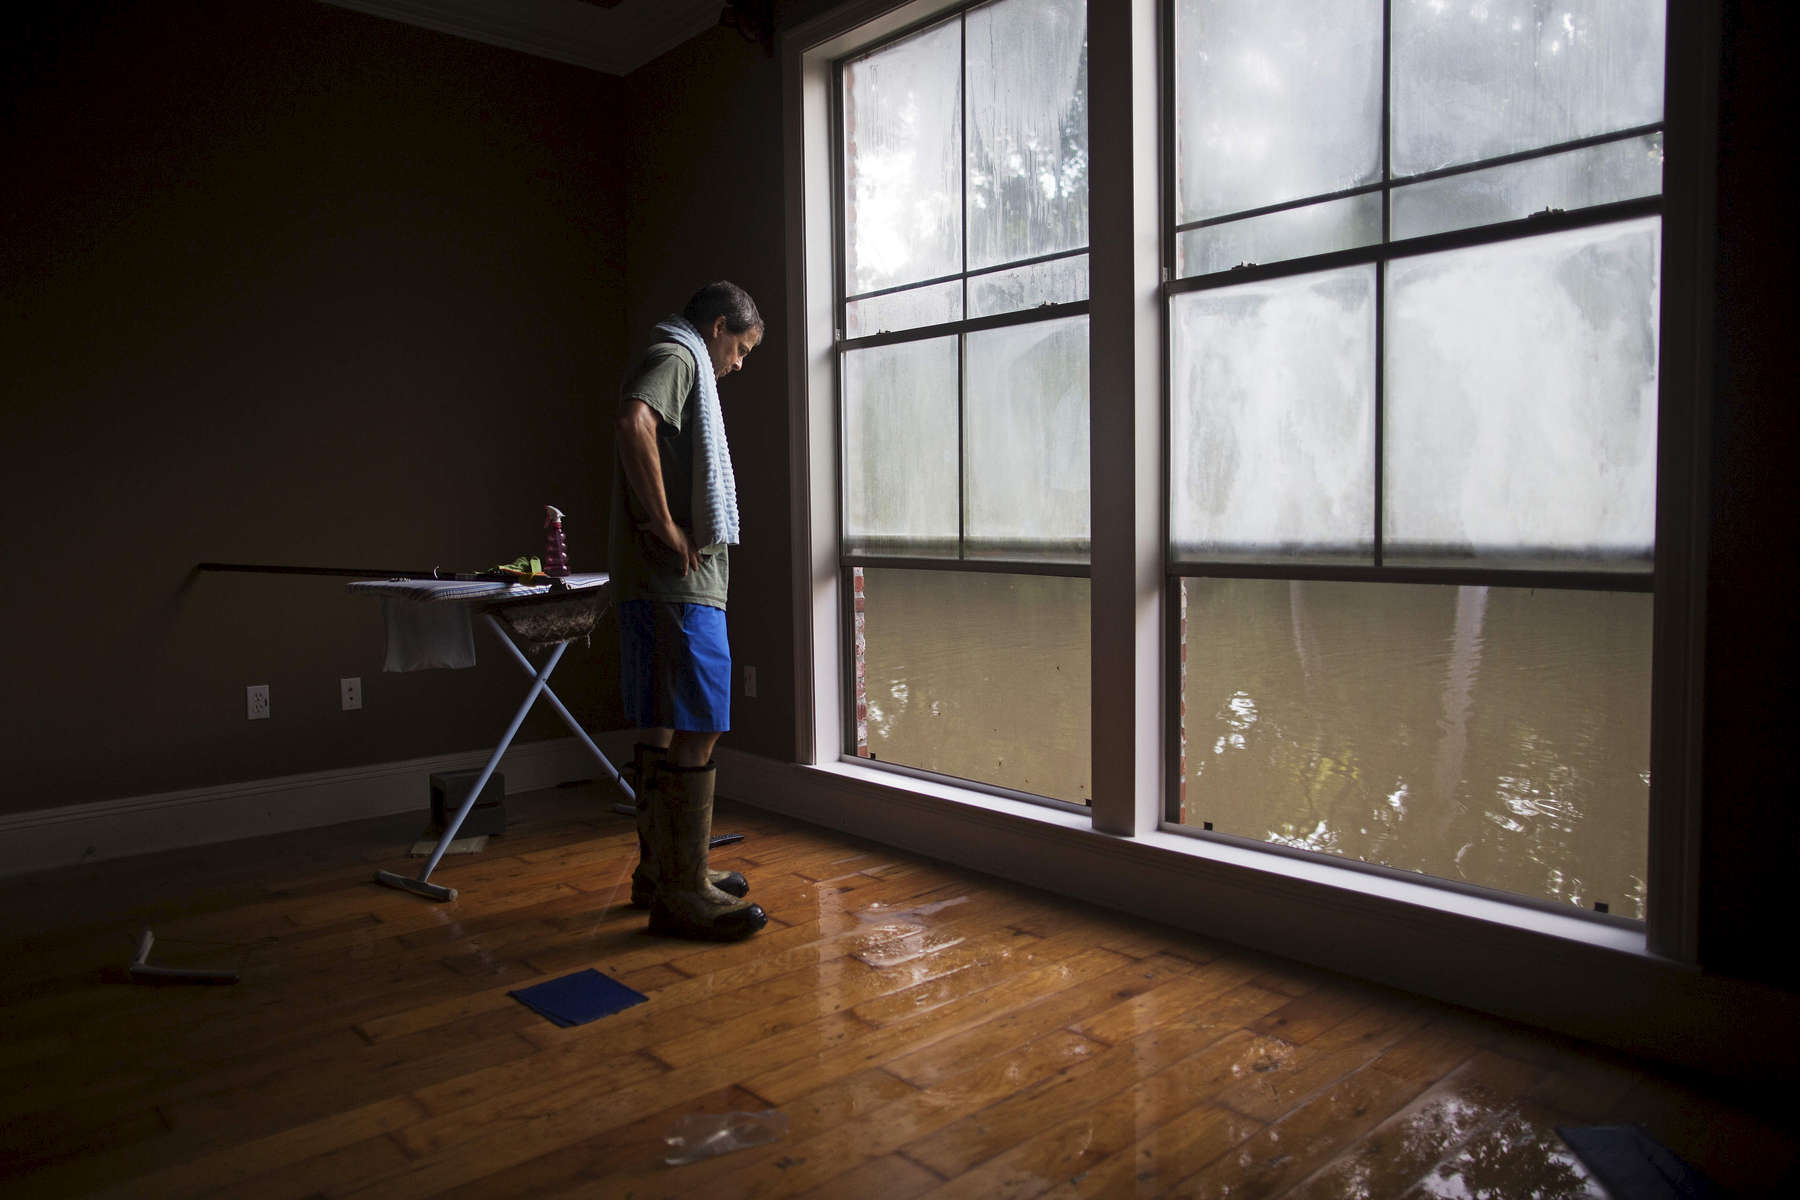 David Key looks at water out of his master bedroom windows in his flooded home in Prairieville, La. USA, Tuesday, Aug. 16, 2016. Key, an insurance adjuster, fled his home as the flood water was rising with his wife and three children and returned Tuesday to assess the damage. Mike Steele, spokesman for the Governor's Office of Homeland Security and Emergency Preparedness, said 102,000 people have registered for federal aid. (AP Photo/Max Becherer)